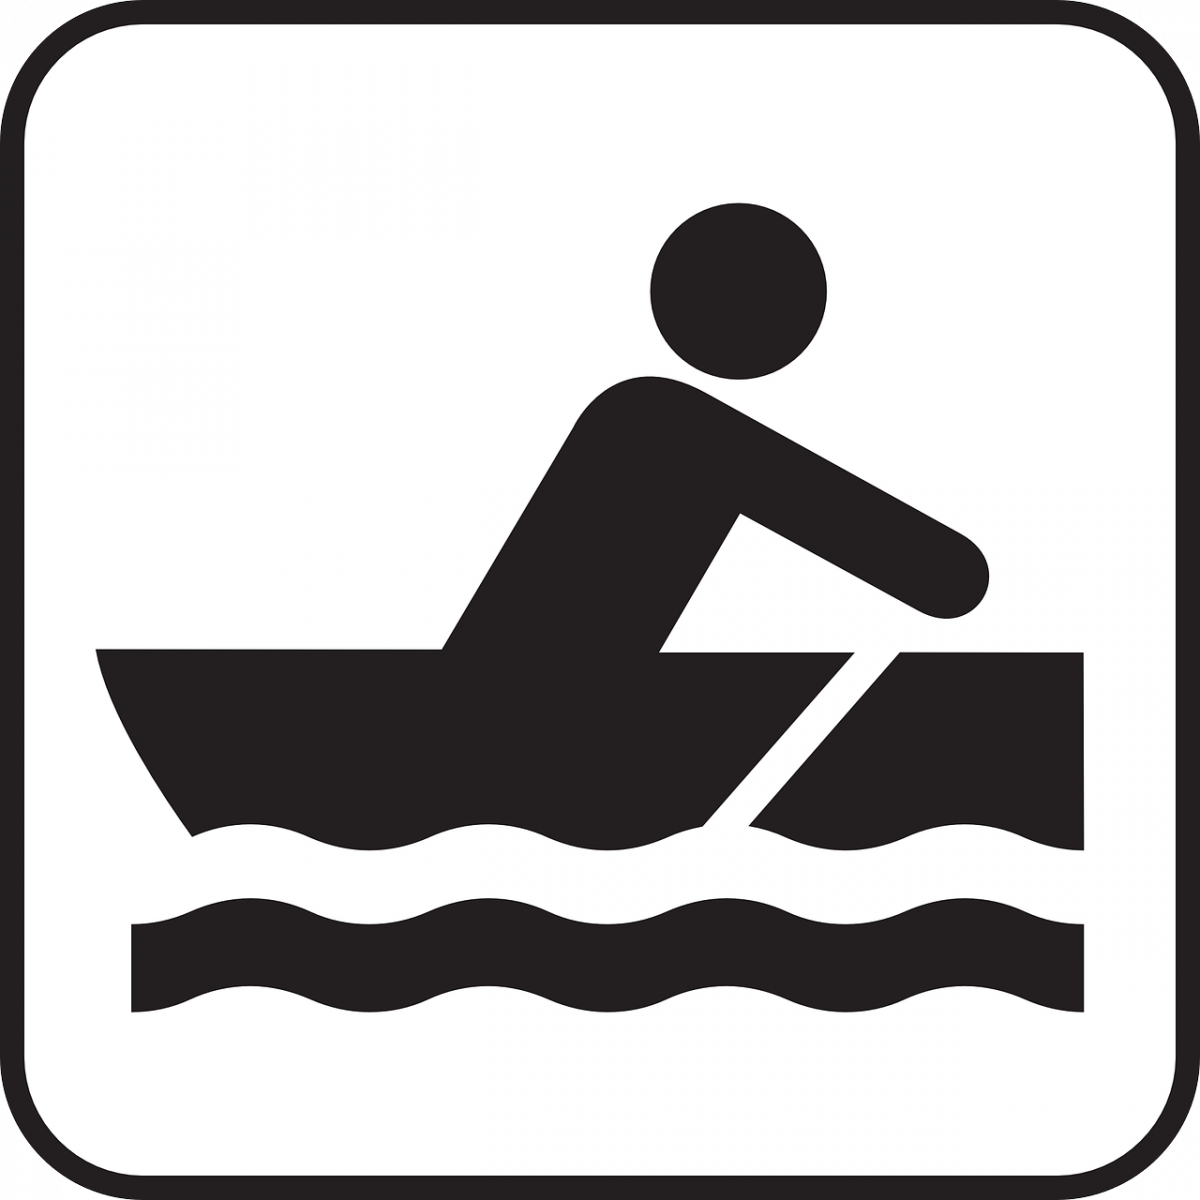 Clip art of person rowing a boat